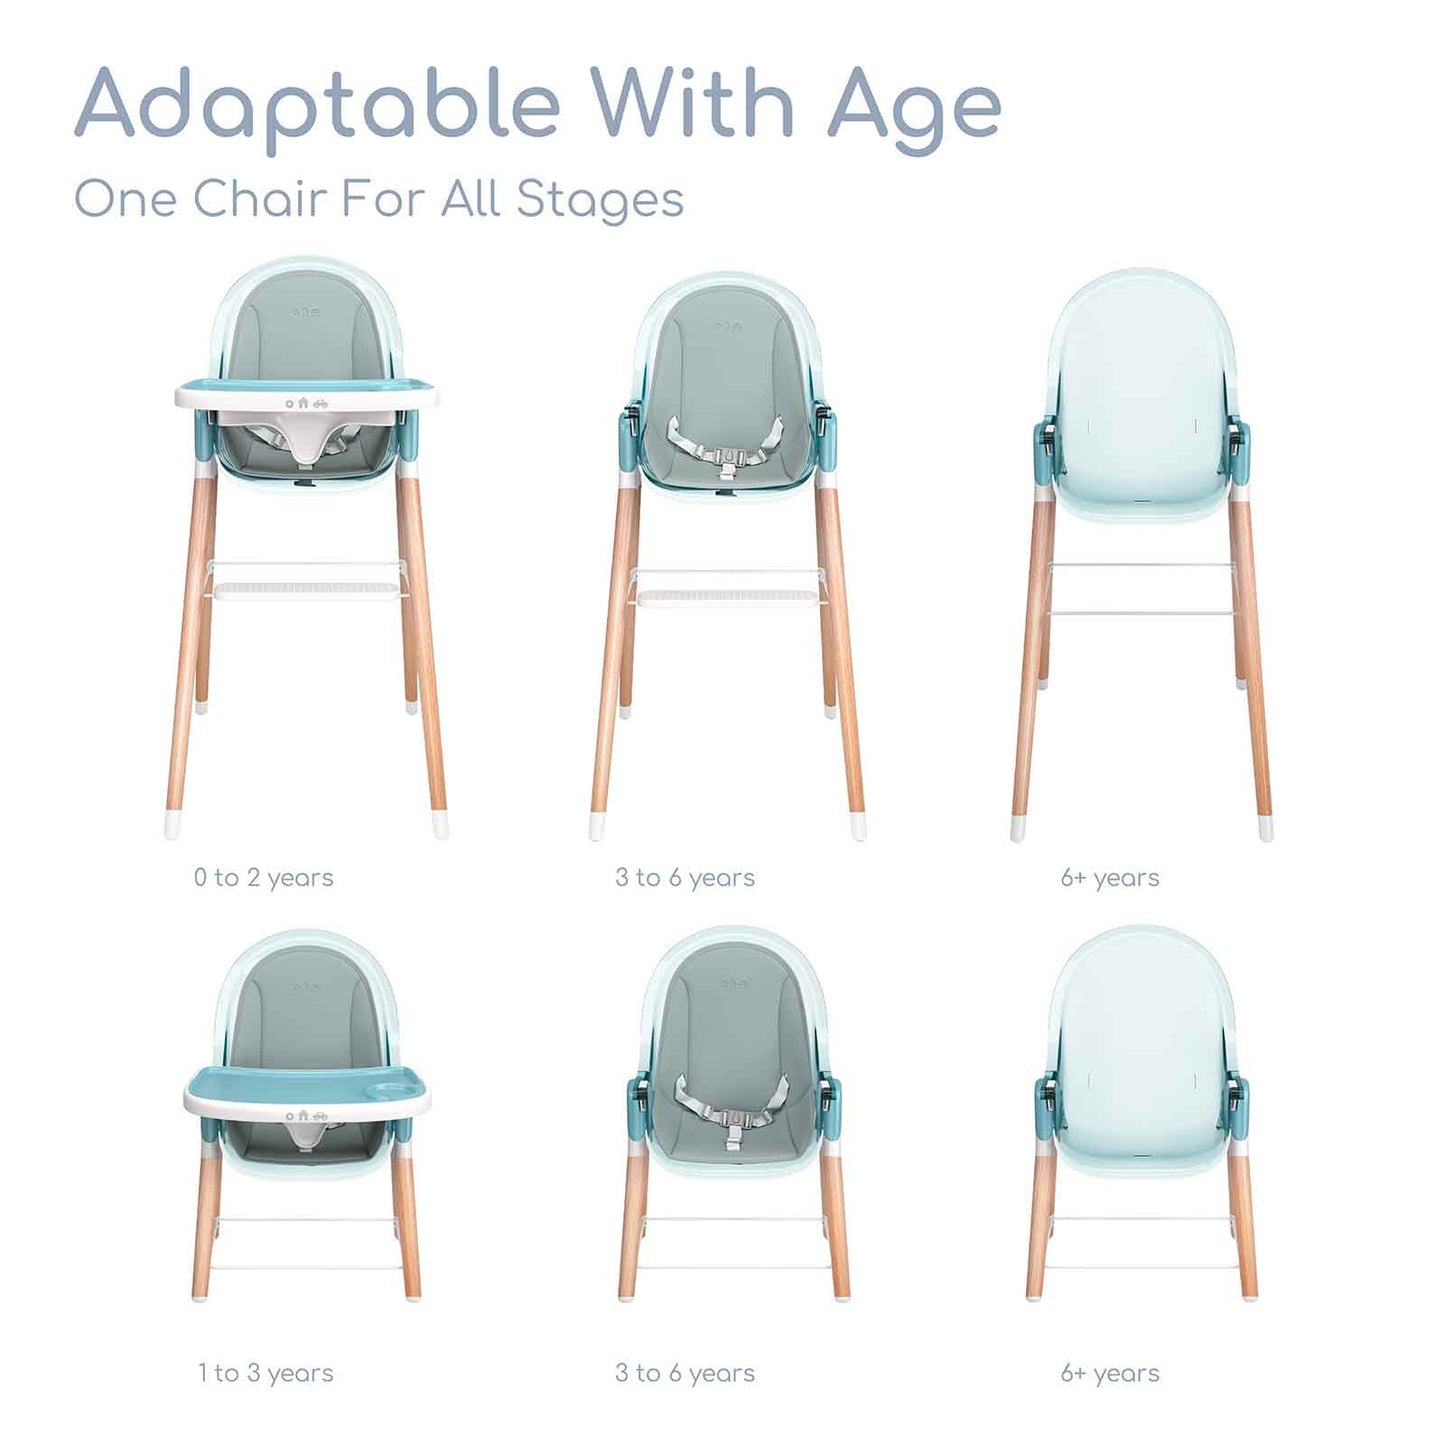 Children of Design 6 in 1 Classic High Chair with Cushion